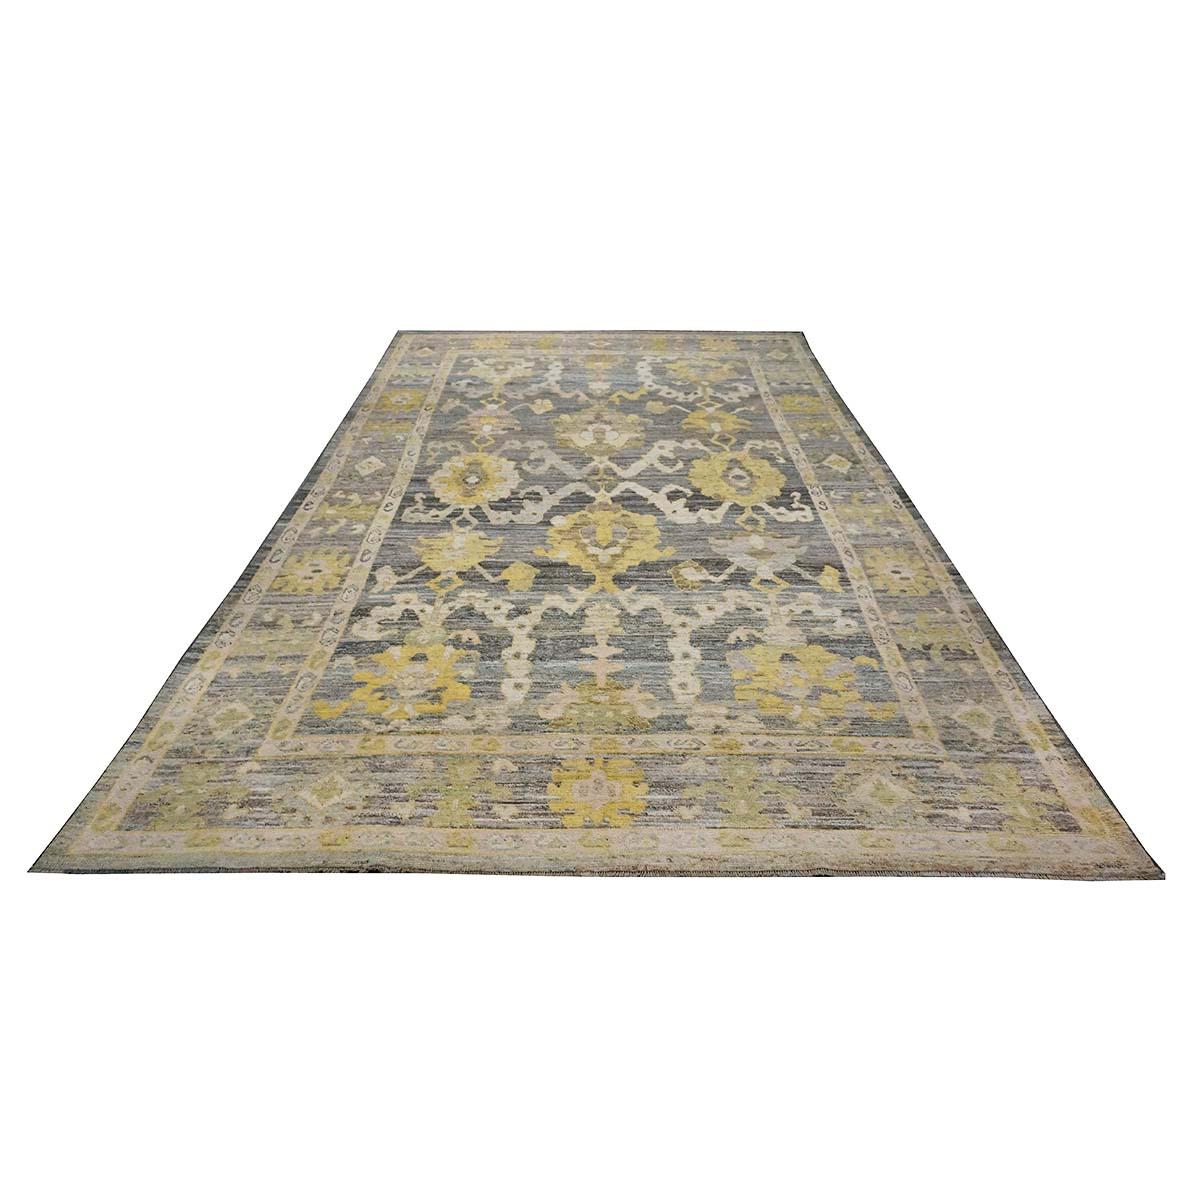   Ashly Fine Rugs presents a 21st-century Turkish Oushak 9x14 Handmade Area Rug. Oushak weavings began in a location just south of Istanbul, in a region that was to become the rugs namesake, Oushak. Although nomads first produced the rugs for